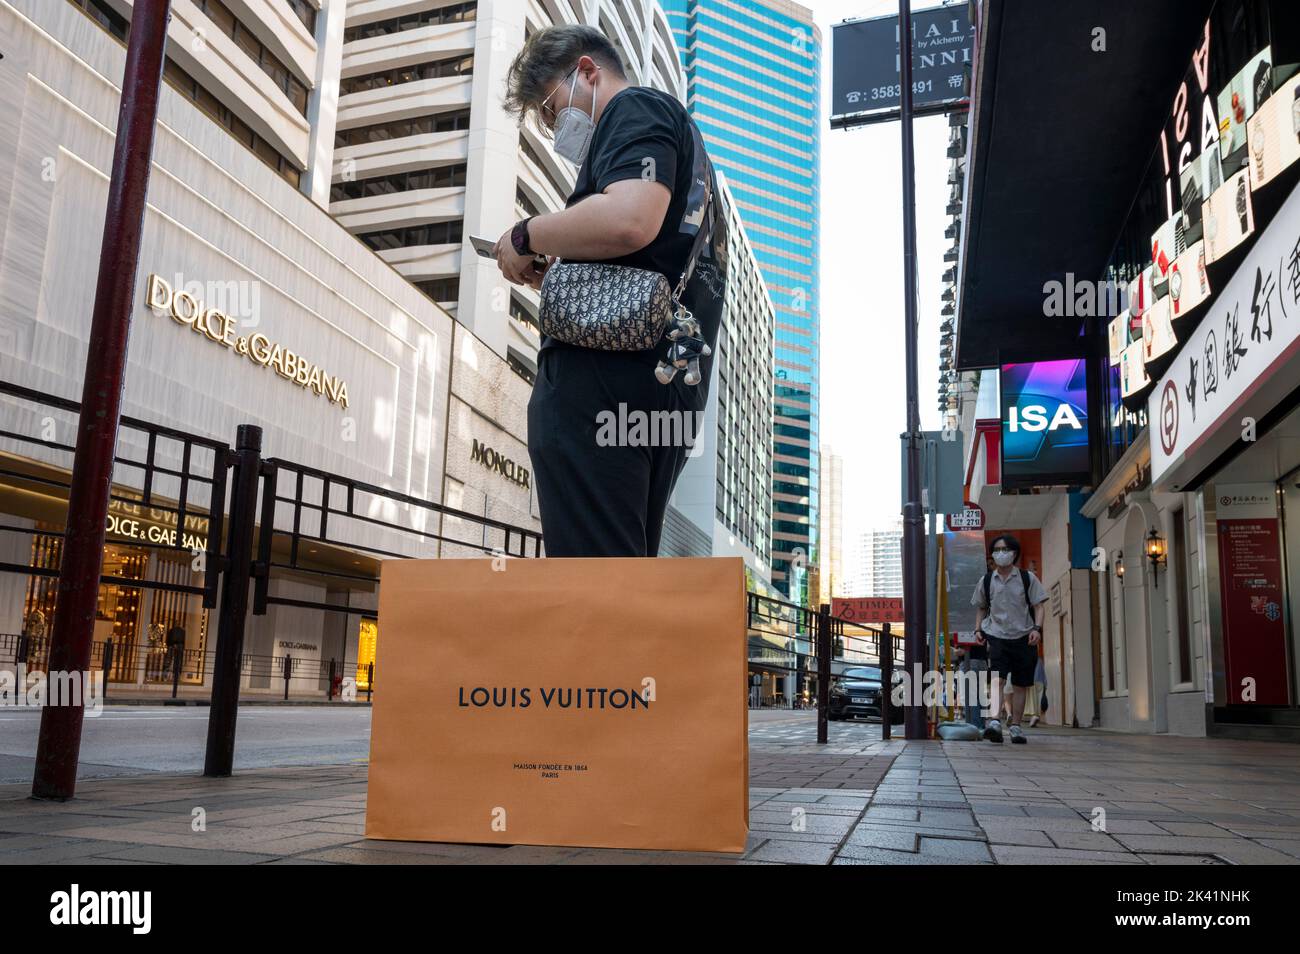 A male customer uses a smartphone next to a Louis Vuitton shopping